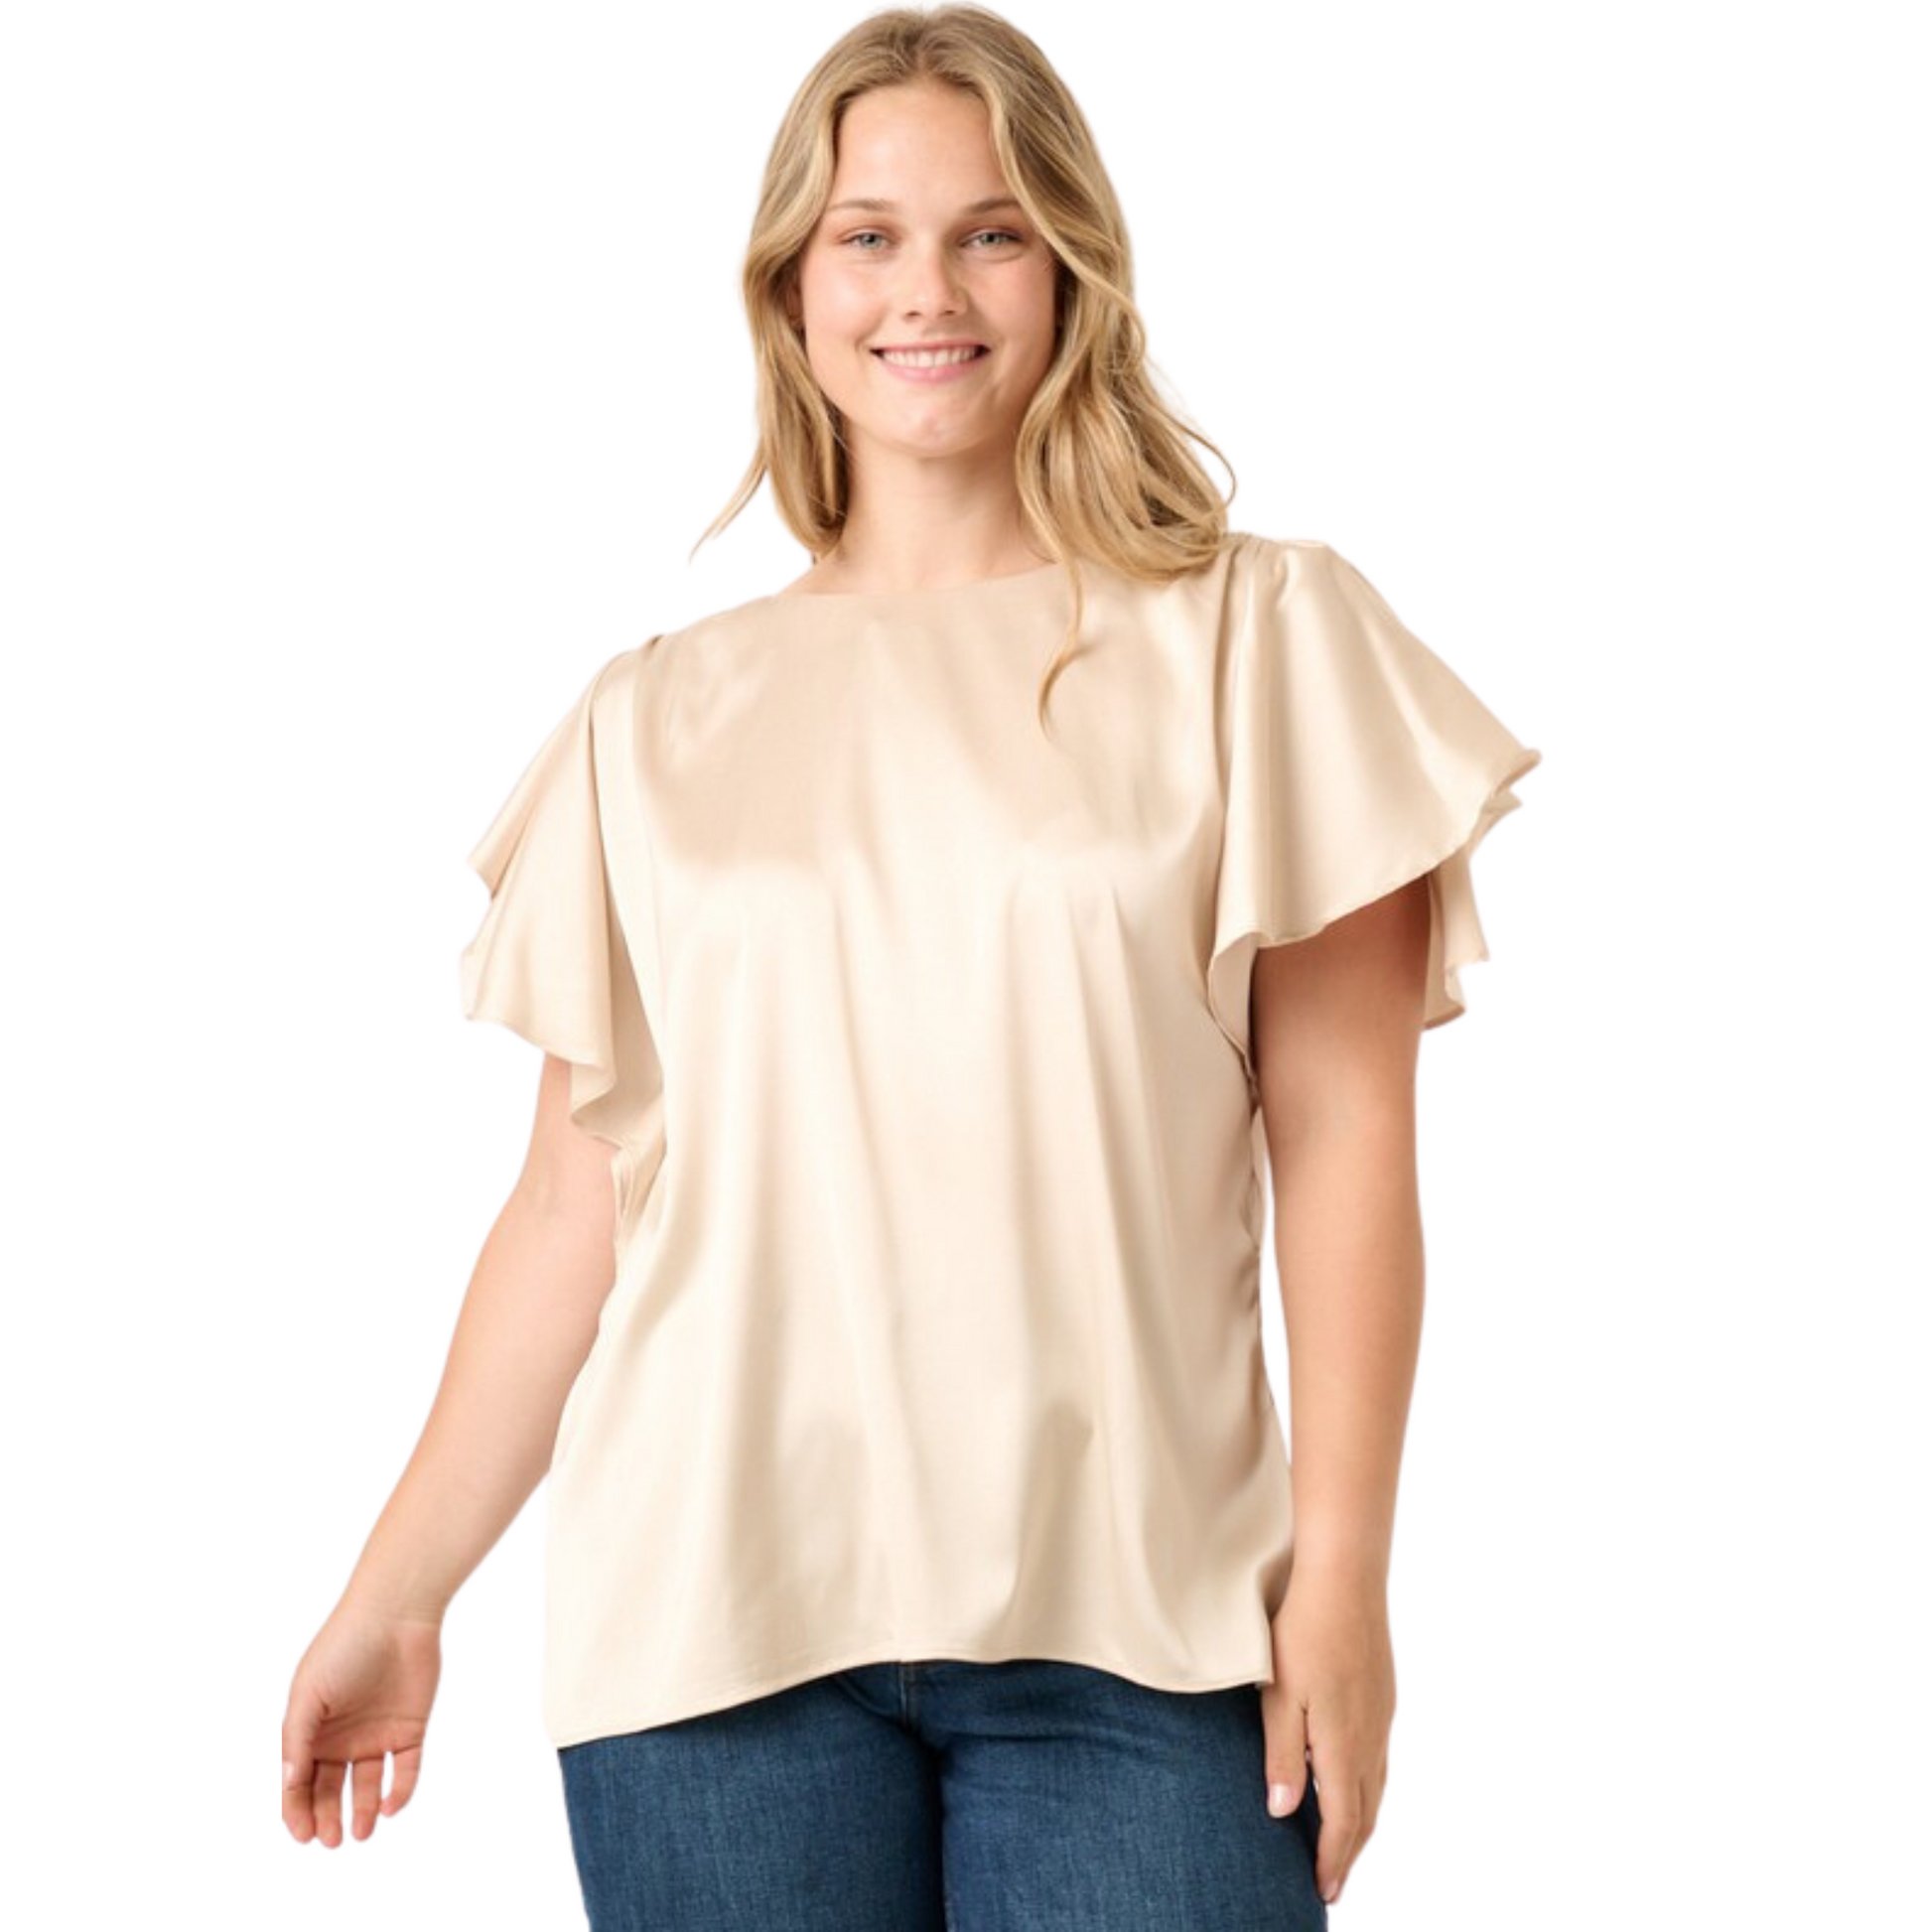 Plus size satin flutter sleeve top in sand